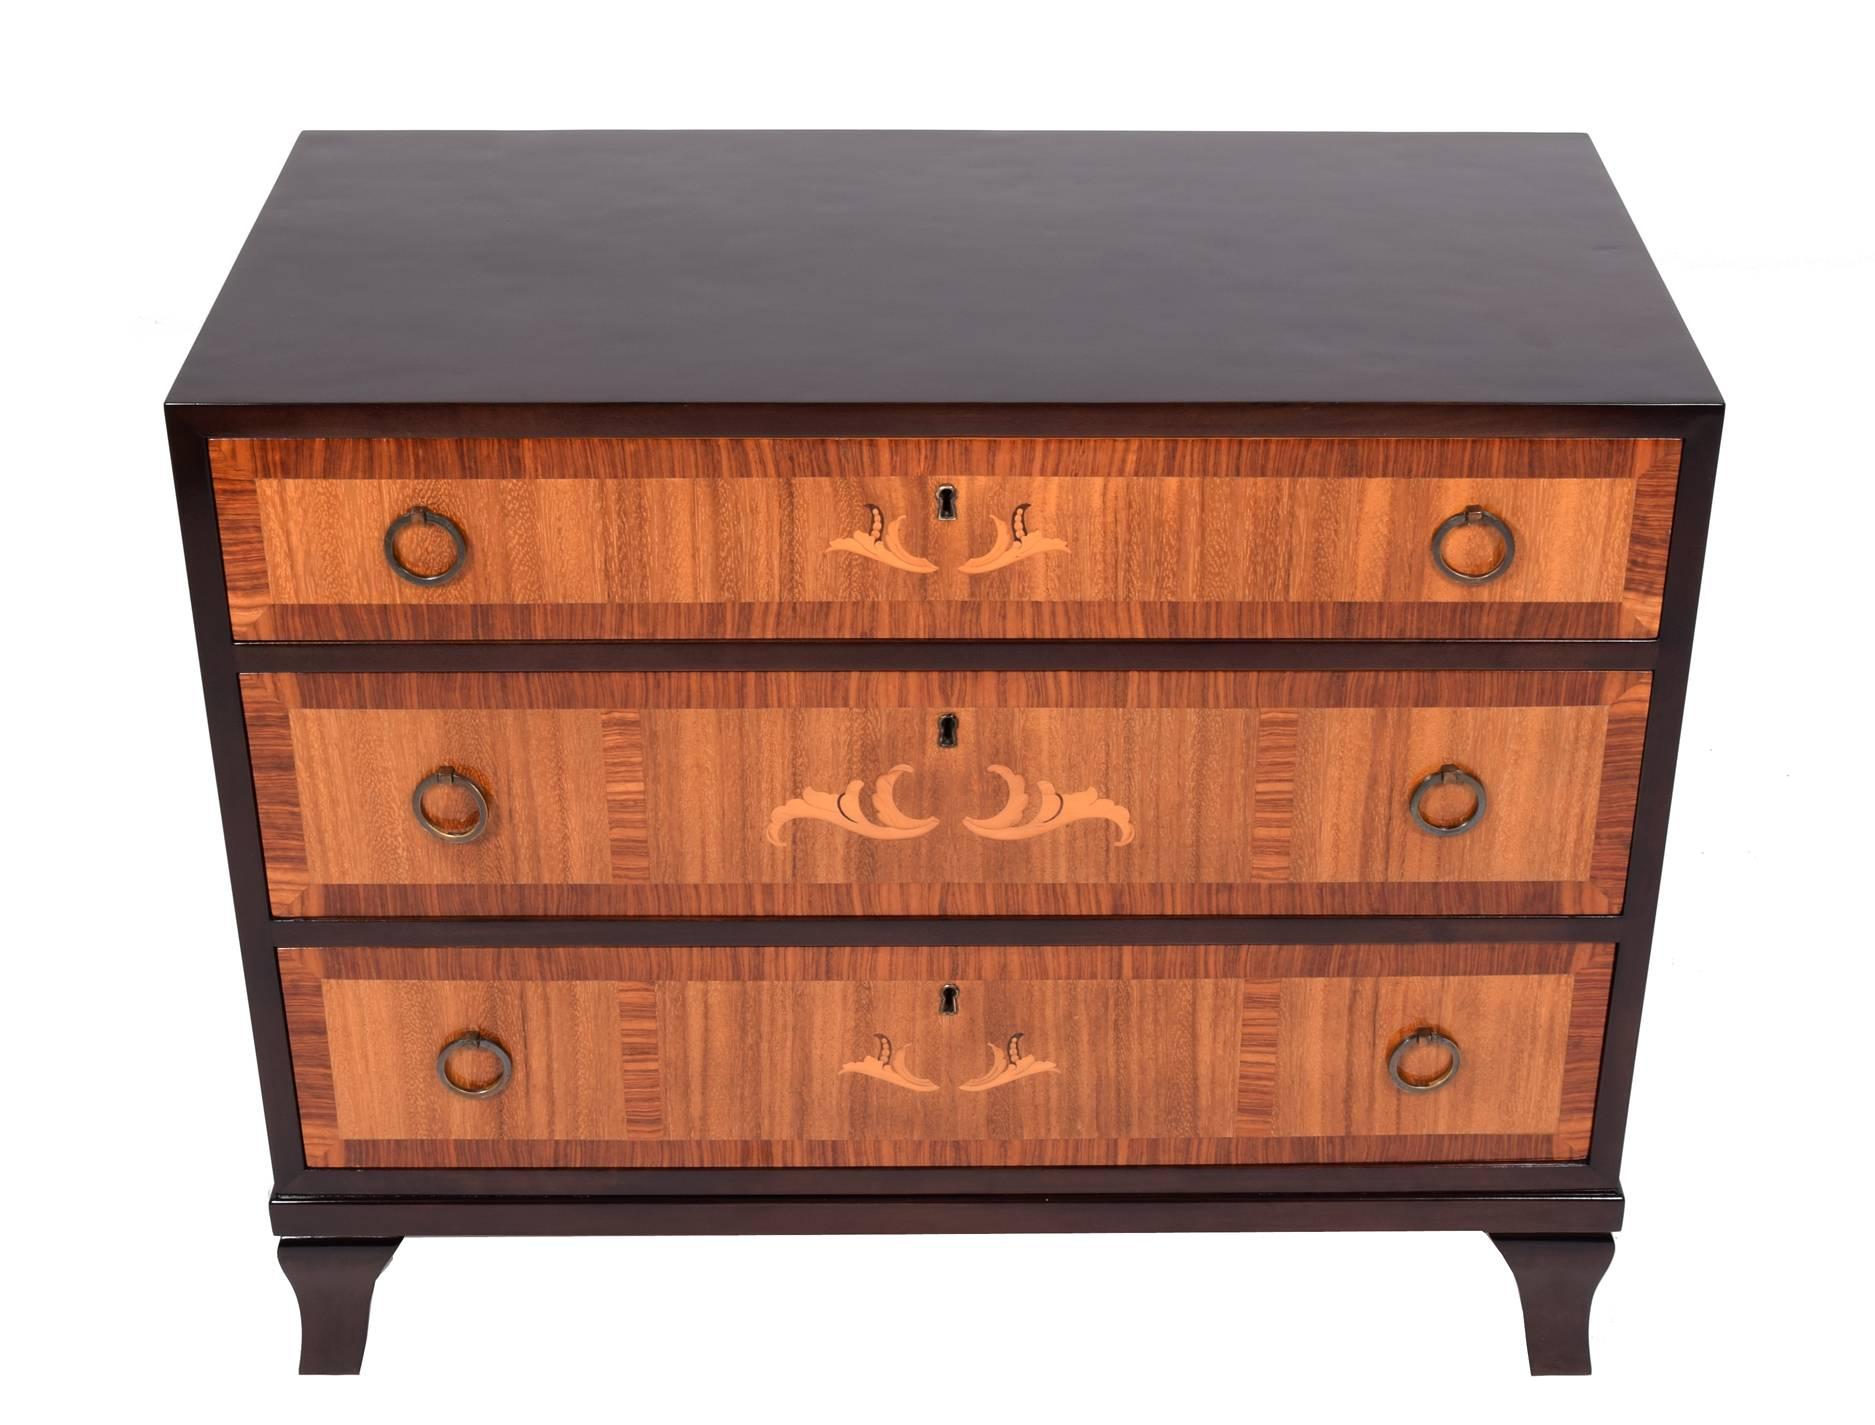 1940s chest of drawers, stained birch case with exotic wood drawer facings, zebra wood and fruitwood inlaid decorations. Neoclassical solid brass drawer pulls.